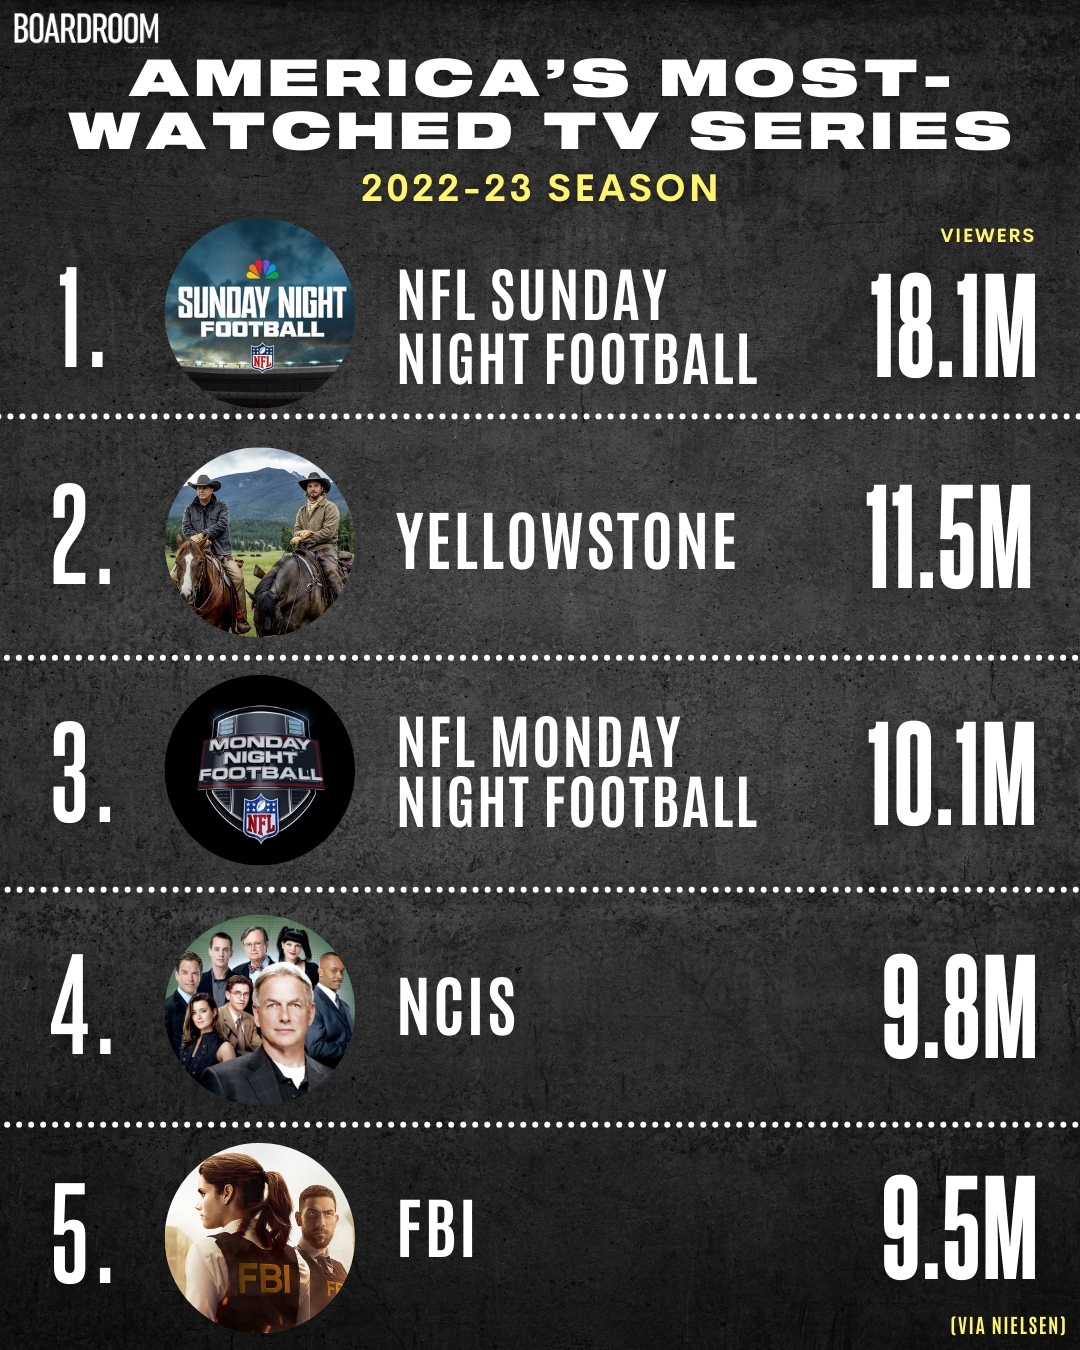 Top5 Watched Tv Series 2022 2023